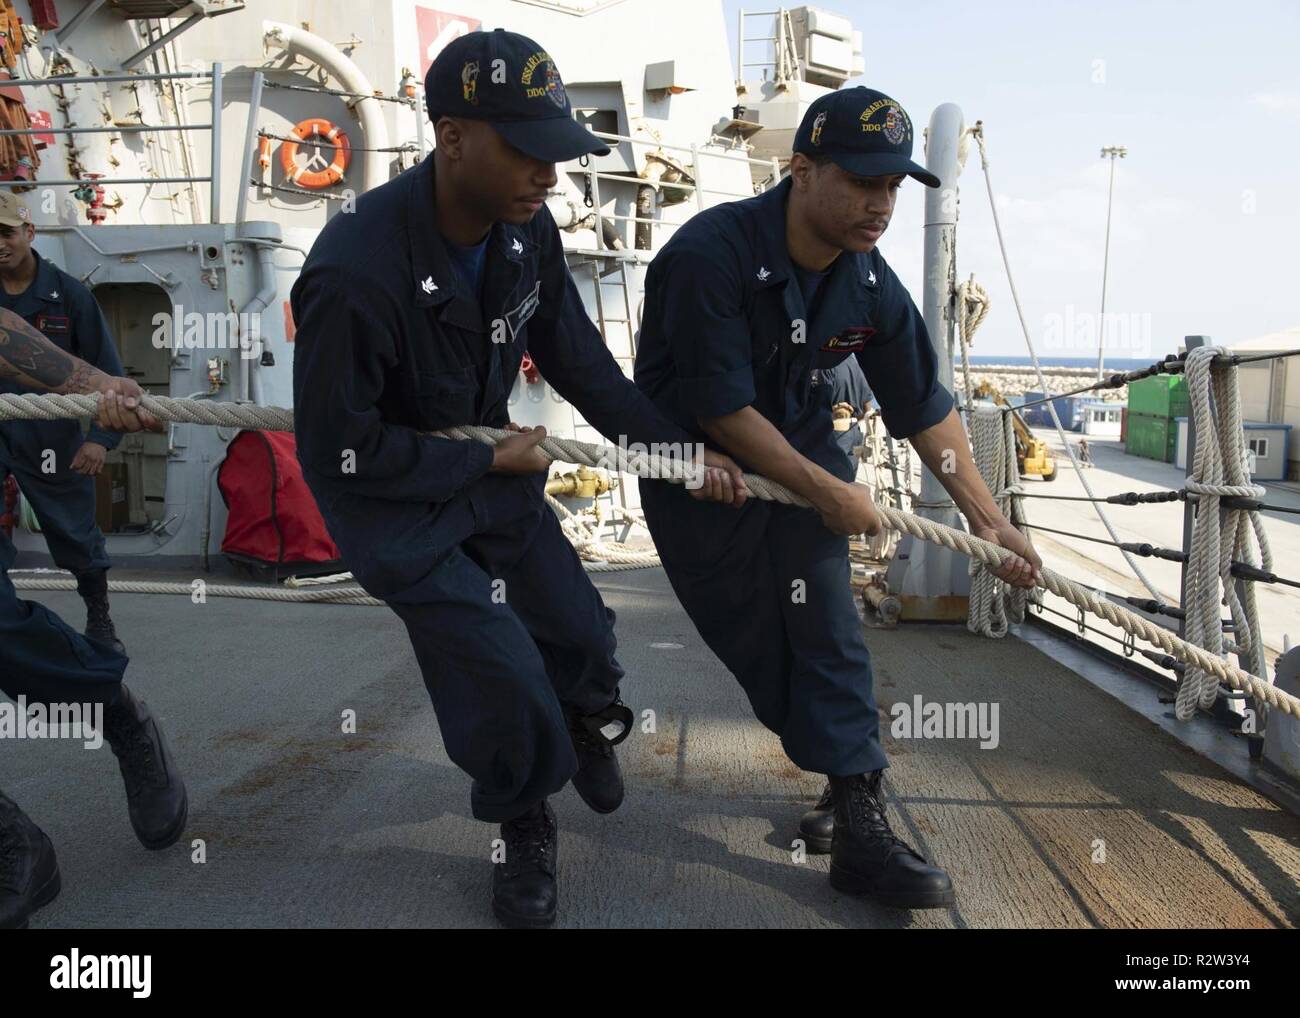 LARNACA, Cyprus (Nov. 9, 2018) Sailors heave a mooring line aboard the Arleigh Burke-class guided-missile destroyer USS Arleigh Burke (DDG 51) as the ship arrives at Larnaca, Cyprus for a scheduled port visit Nov. 9, 2018. Arleigh Burke, homeported at Naval Station Norfolk, is conducting naval operations in the U.S. 6th Fleet area of operations in support of U.S. national security interests in Europe and Africa. Stock Photo